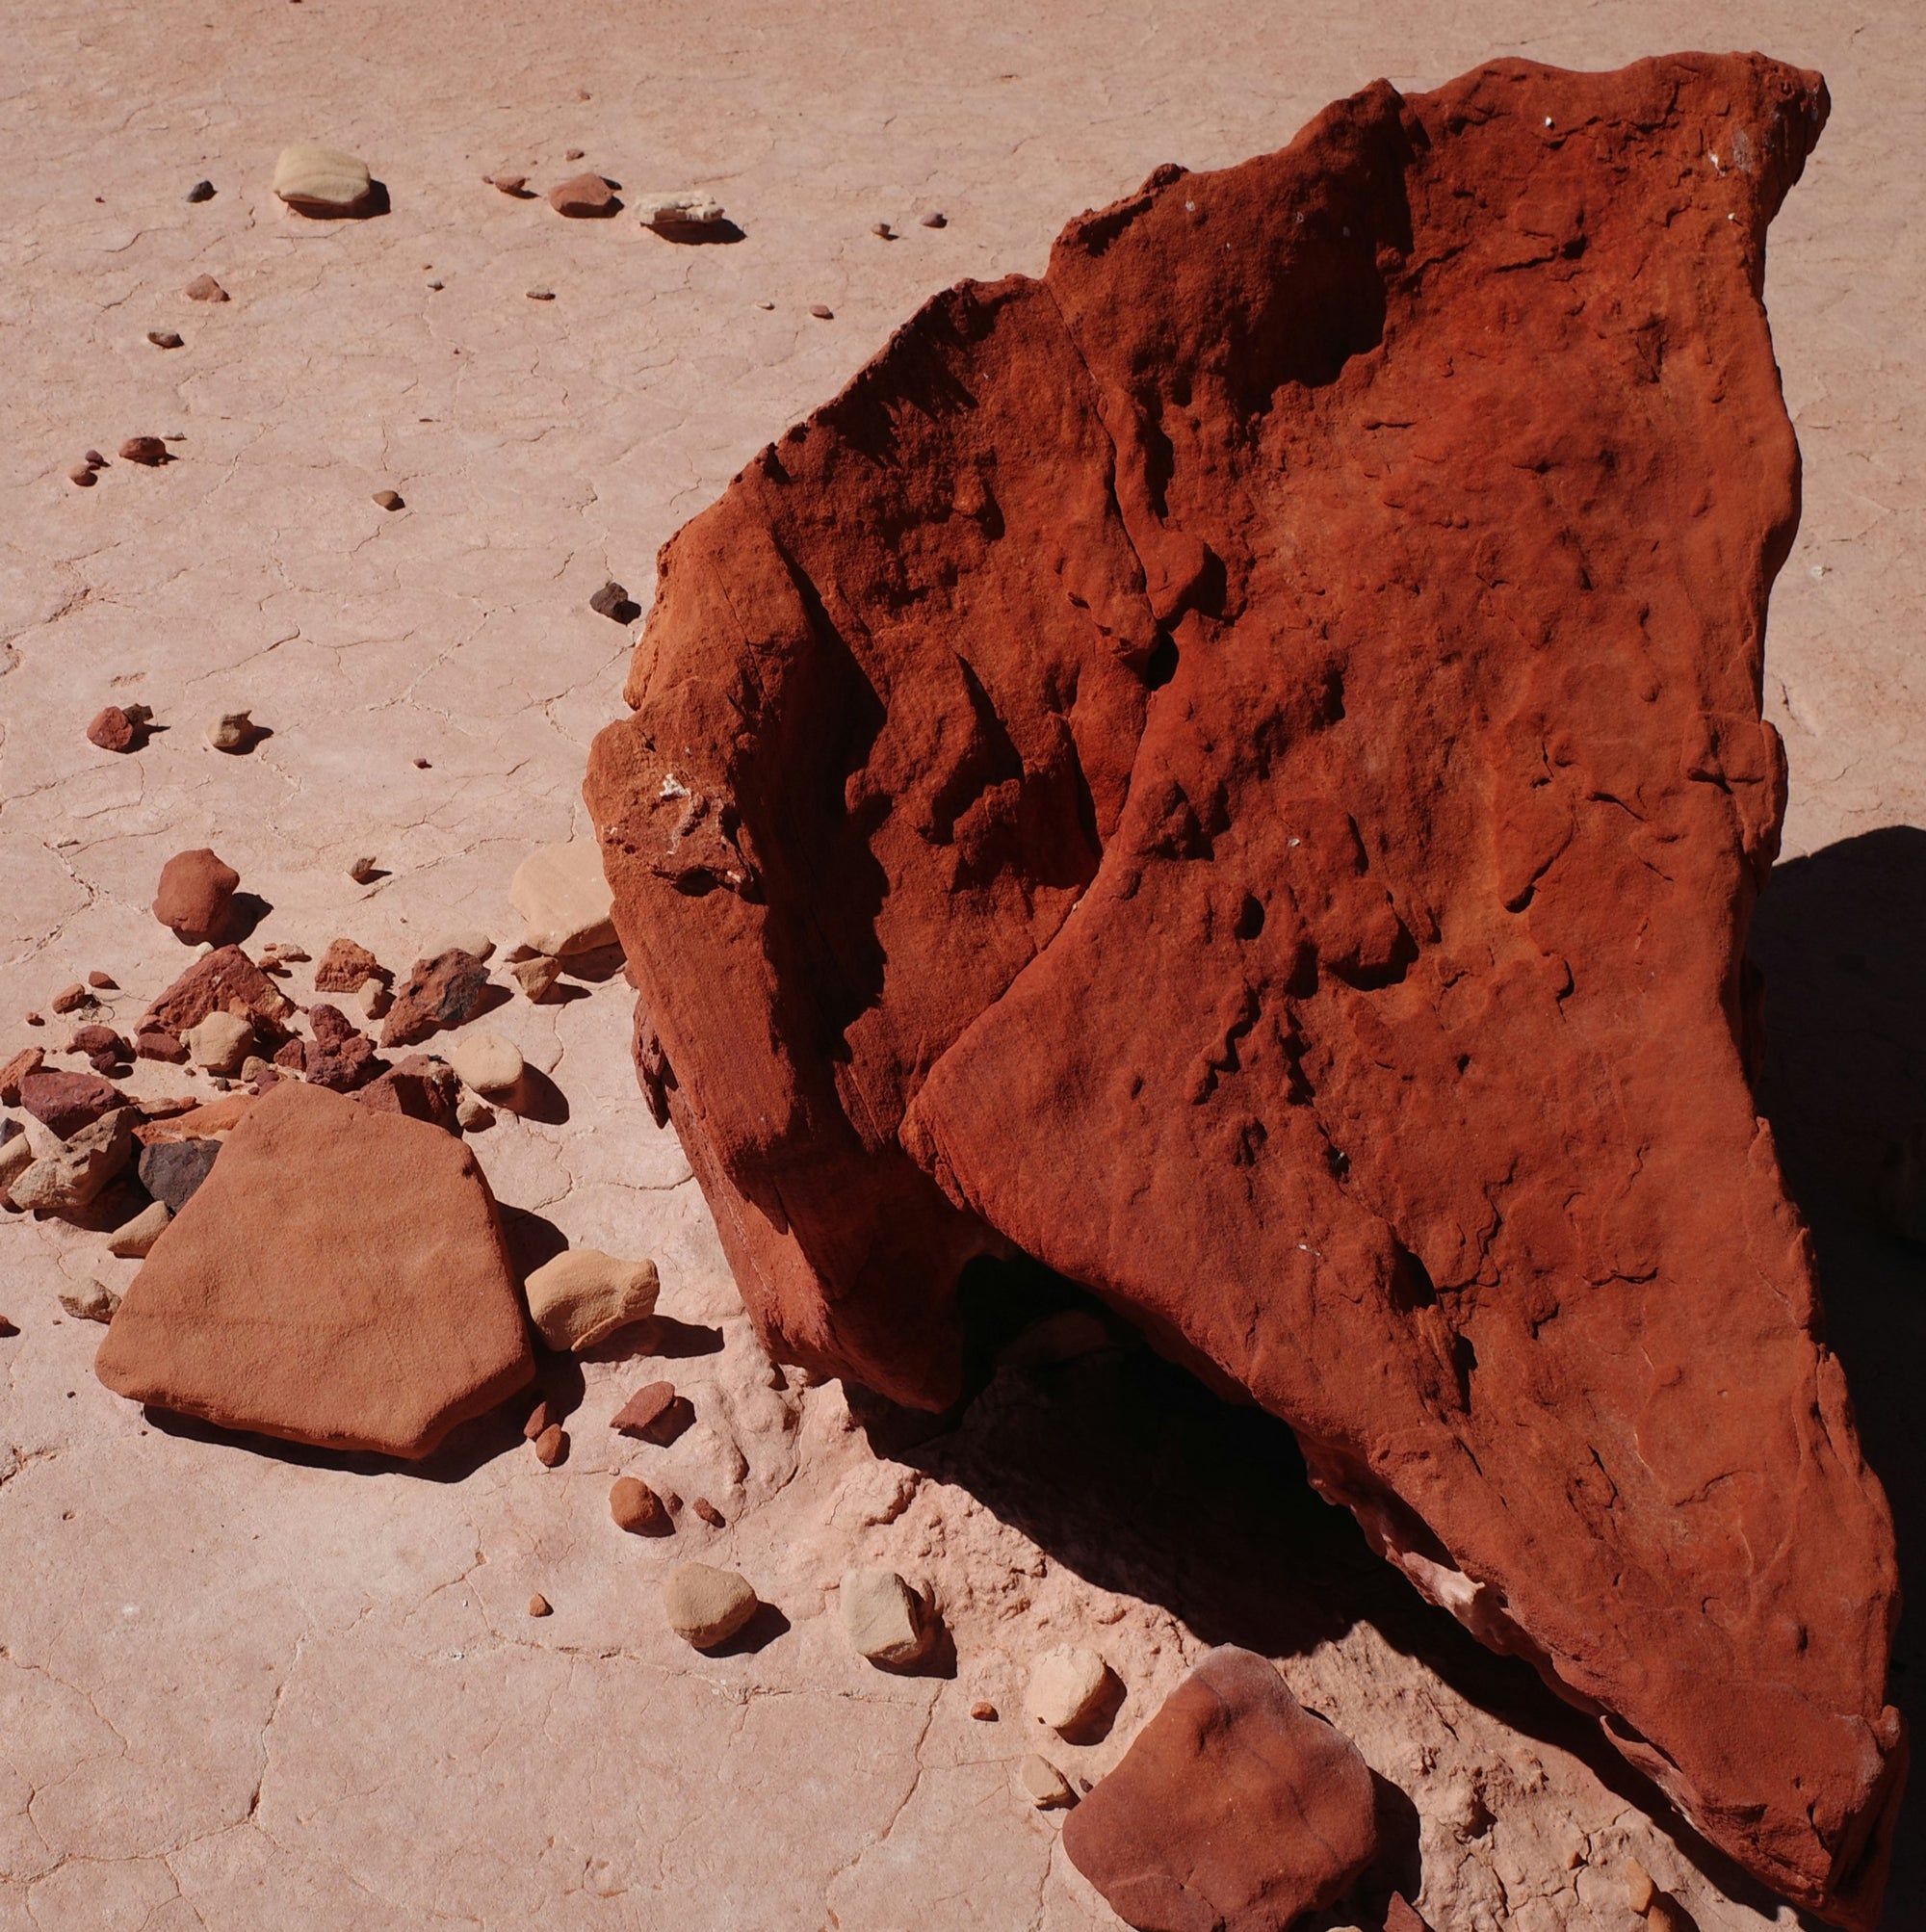 A large, jagged piece of reddish-brown rock lies on a cracked, dry ground under direct sunlight. Smaller rock fragments are scattered around the main rock, contributing to a stark desert landscape.